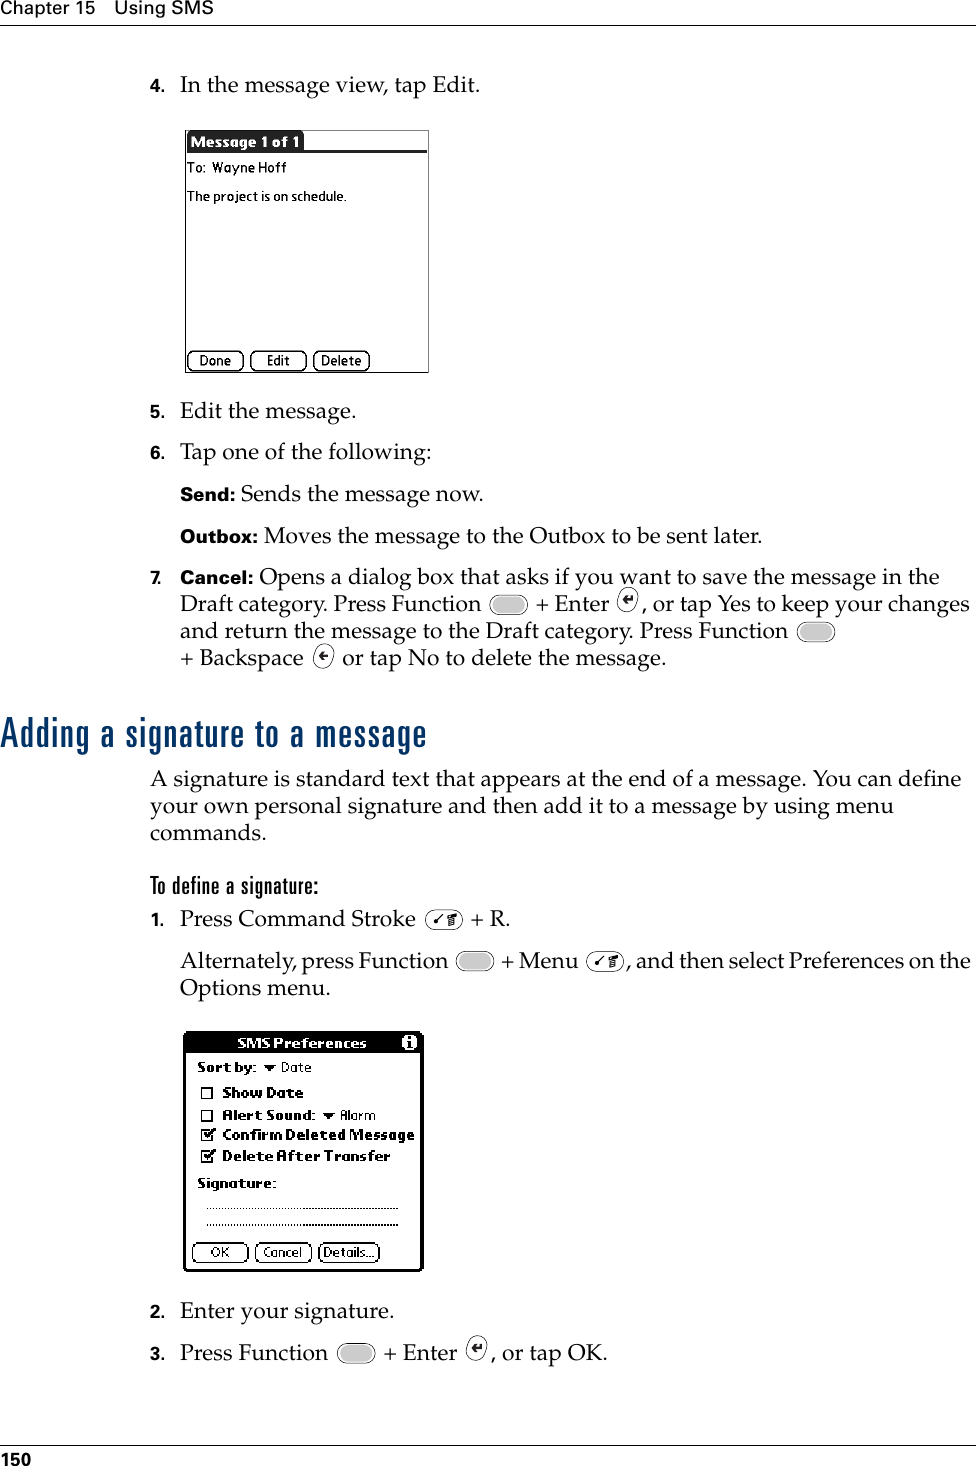 Chapter 15 Using SMS1504. In the message view, tap Edit.5. Edit the message.6. Tap one of the following:Send: Sends the message now.Outbox: Moves the message to the Outbox to be sent later.7. Cancel: Opens a dialog box that asks if you want to save the message in the Draft category. Press Function   + Enter  , or tap Yes to keep your changes and return the message to the Draft category. Press Function   + Backspace   or tap No to delete the message.Adding a signature to a messageA signature is standard text that appears at the end of a message. You can define your own personal signature and then add it to a message by using menu commands. To define a signature:1. Press Command Stroke   + R.Alternately, press Function   + Menu  , and then select Preferences on the Options menu. 2. Enter your signature.3. Press Function   + Enter  , or tap OK.Palm, Inc. Confidential